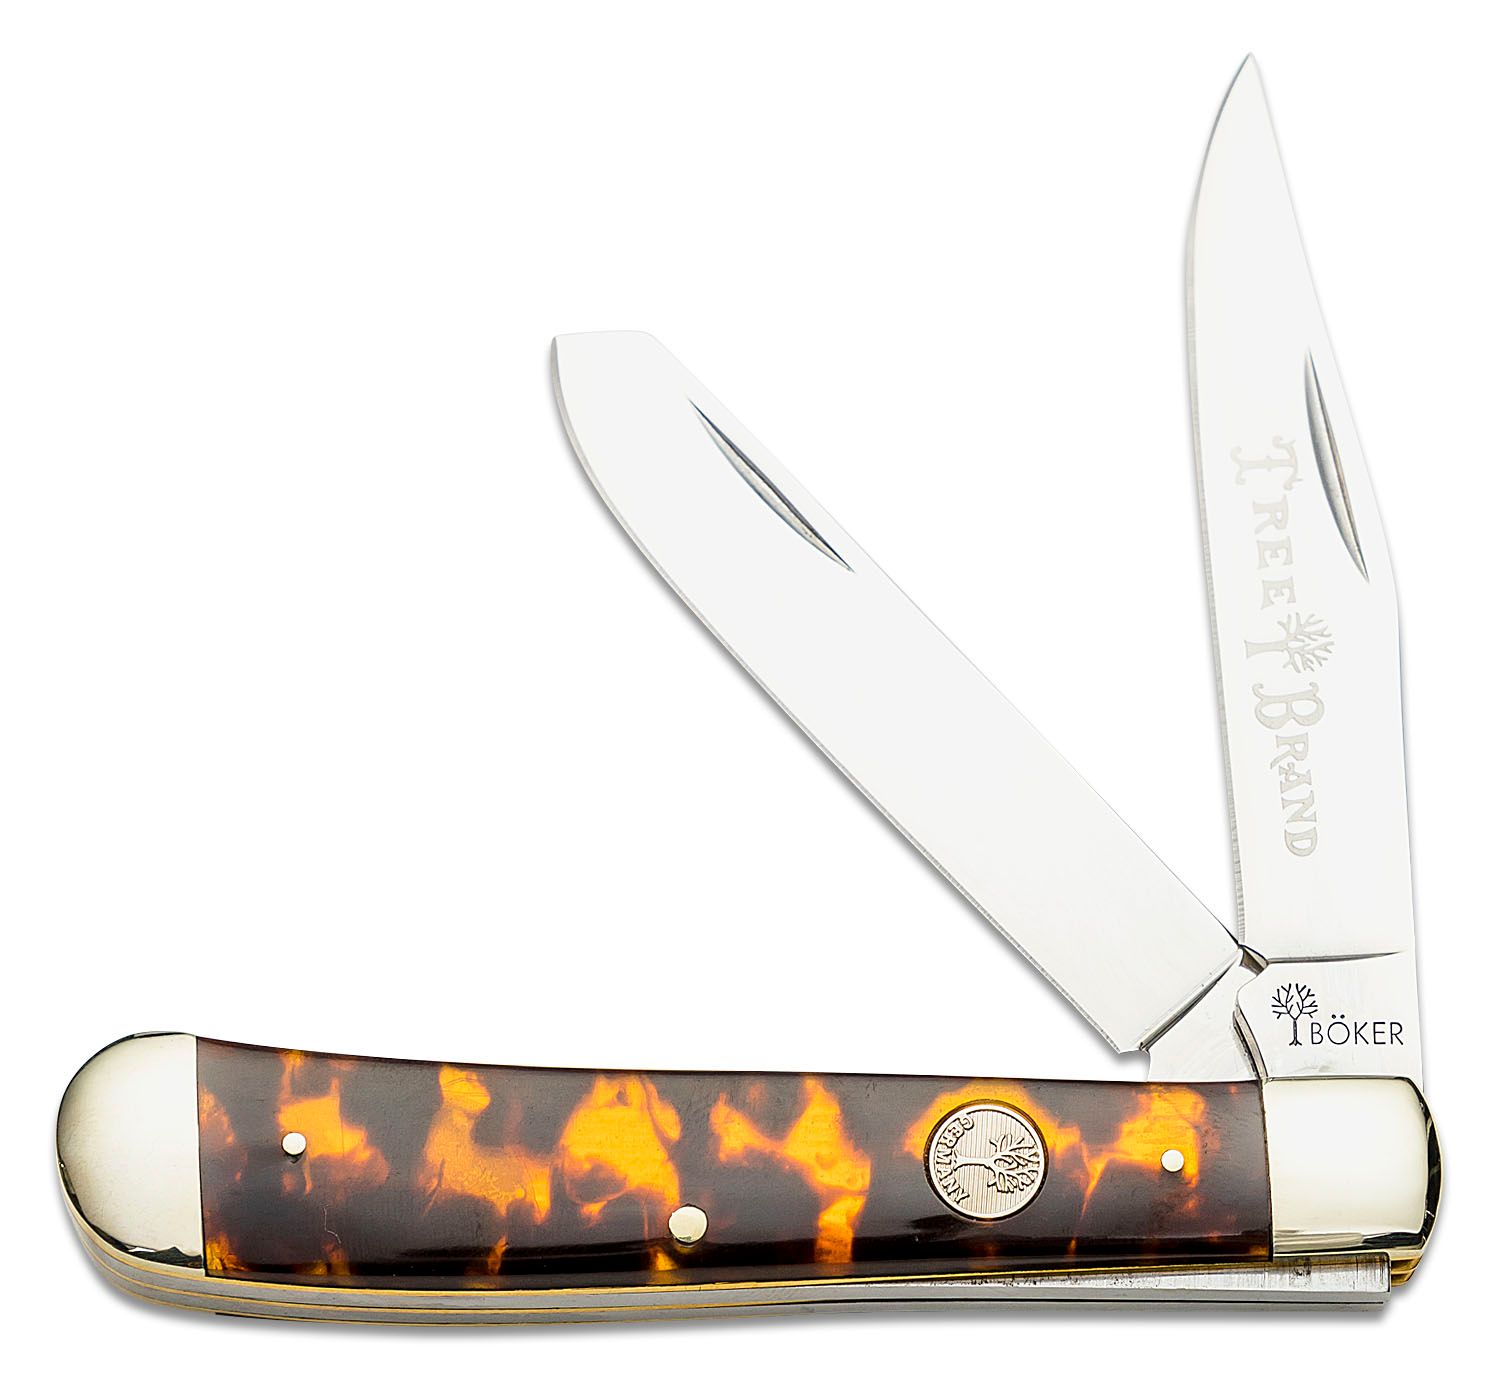 Boker Traditional Series 2.0 Red Bone Trapper Knife, D2 Satin Blades